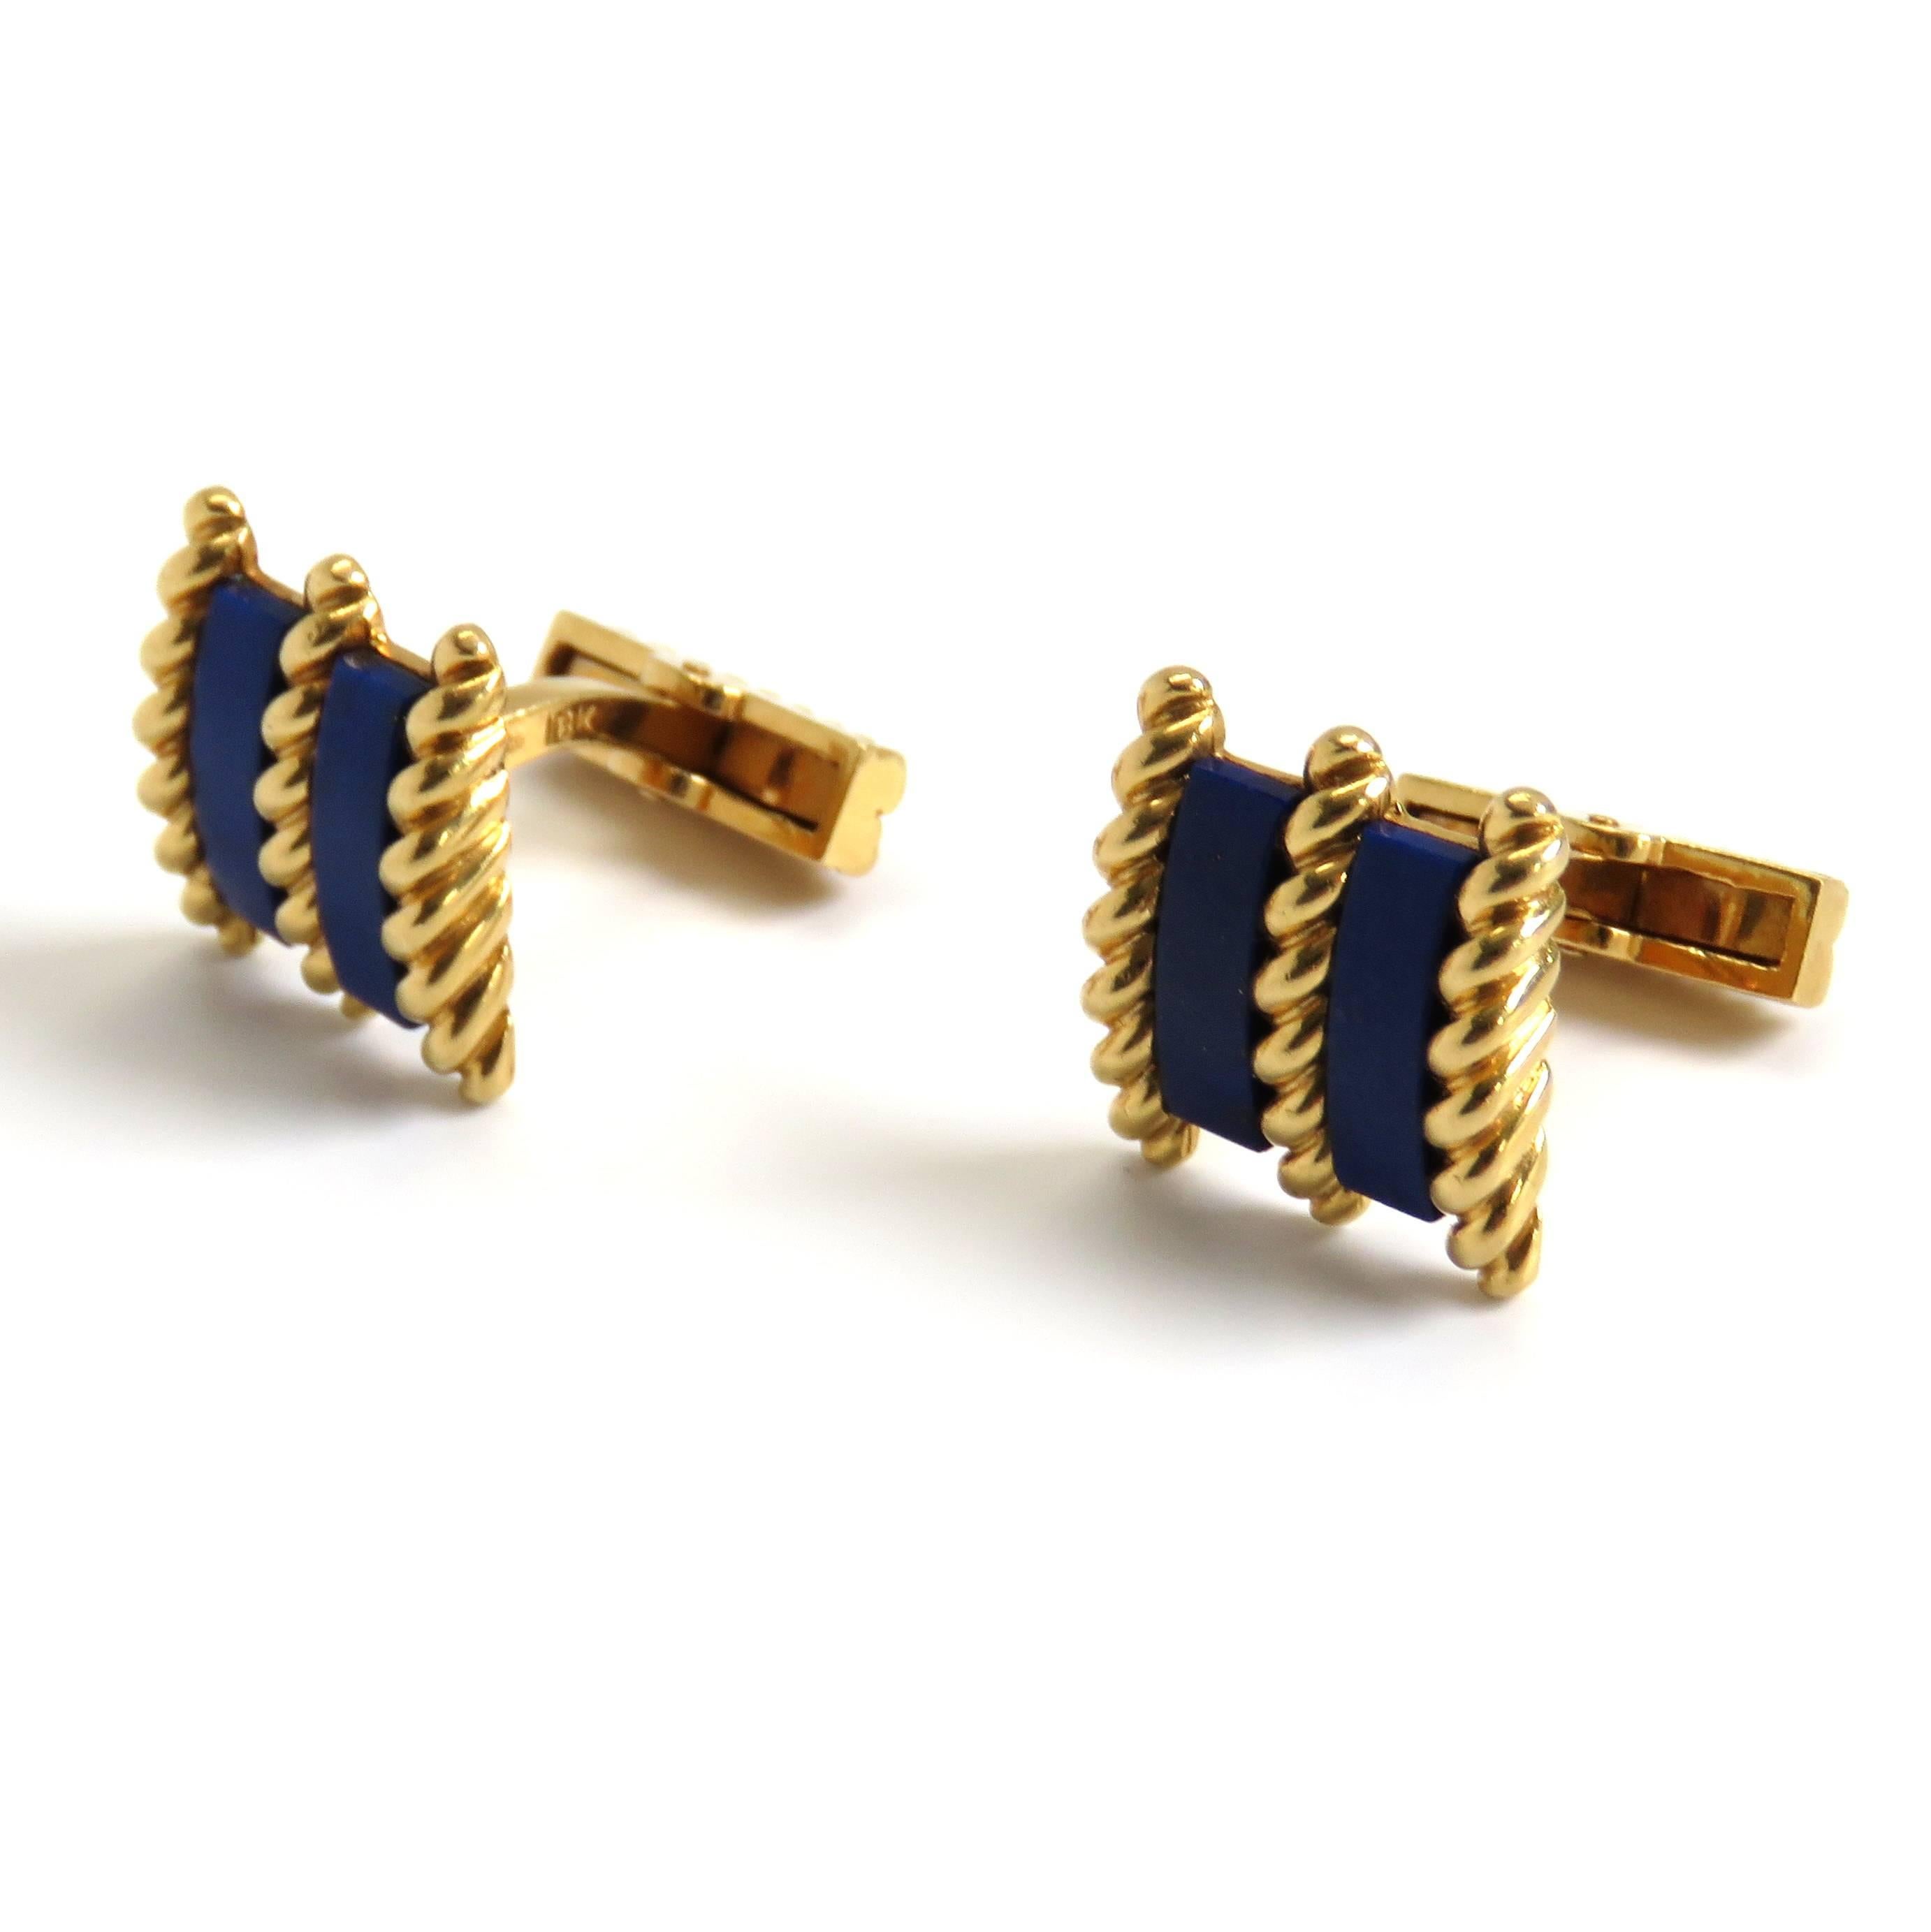 A pair of 18k yellow gold cufflinks set with lapis.  The cufflinks measure 17mm x 16mm and weigh 20.3 grams.  Marked: Tiffany & co; Co,18k.